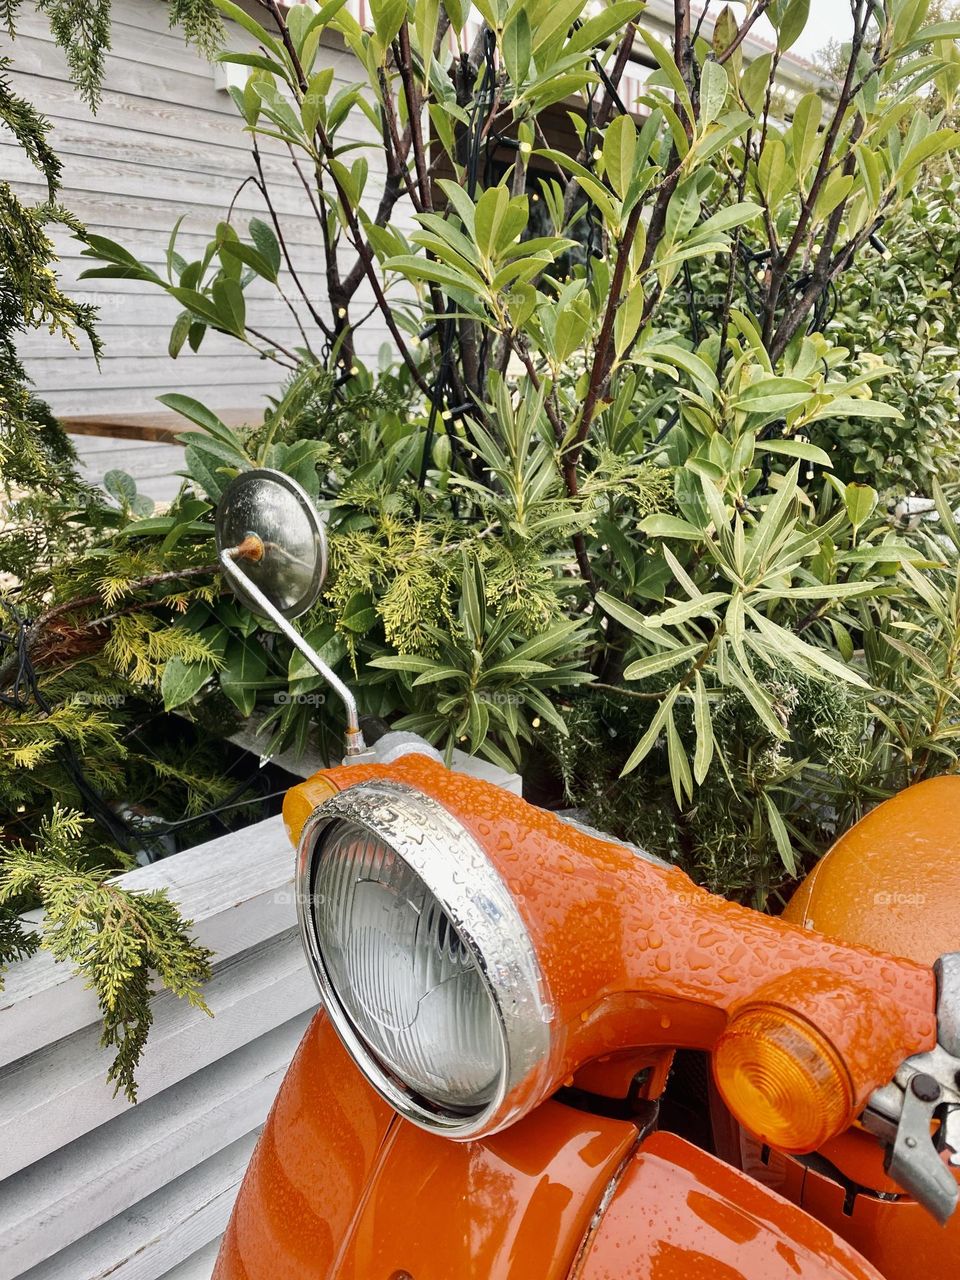 Orange scooter in a bushes after rain.